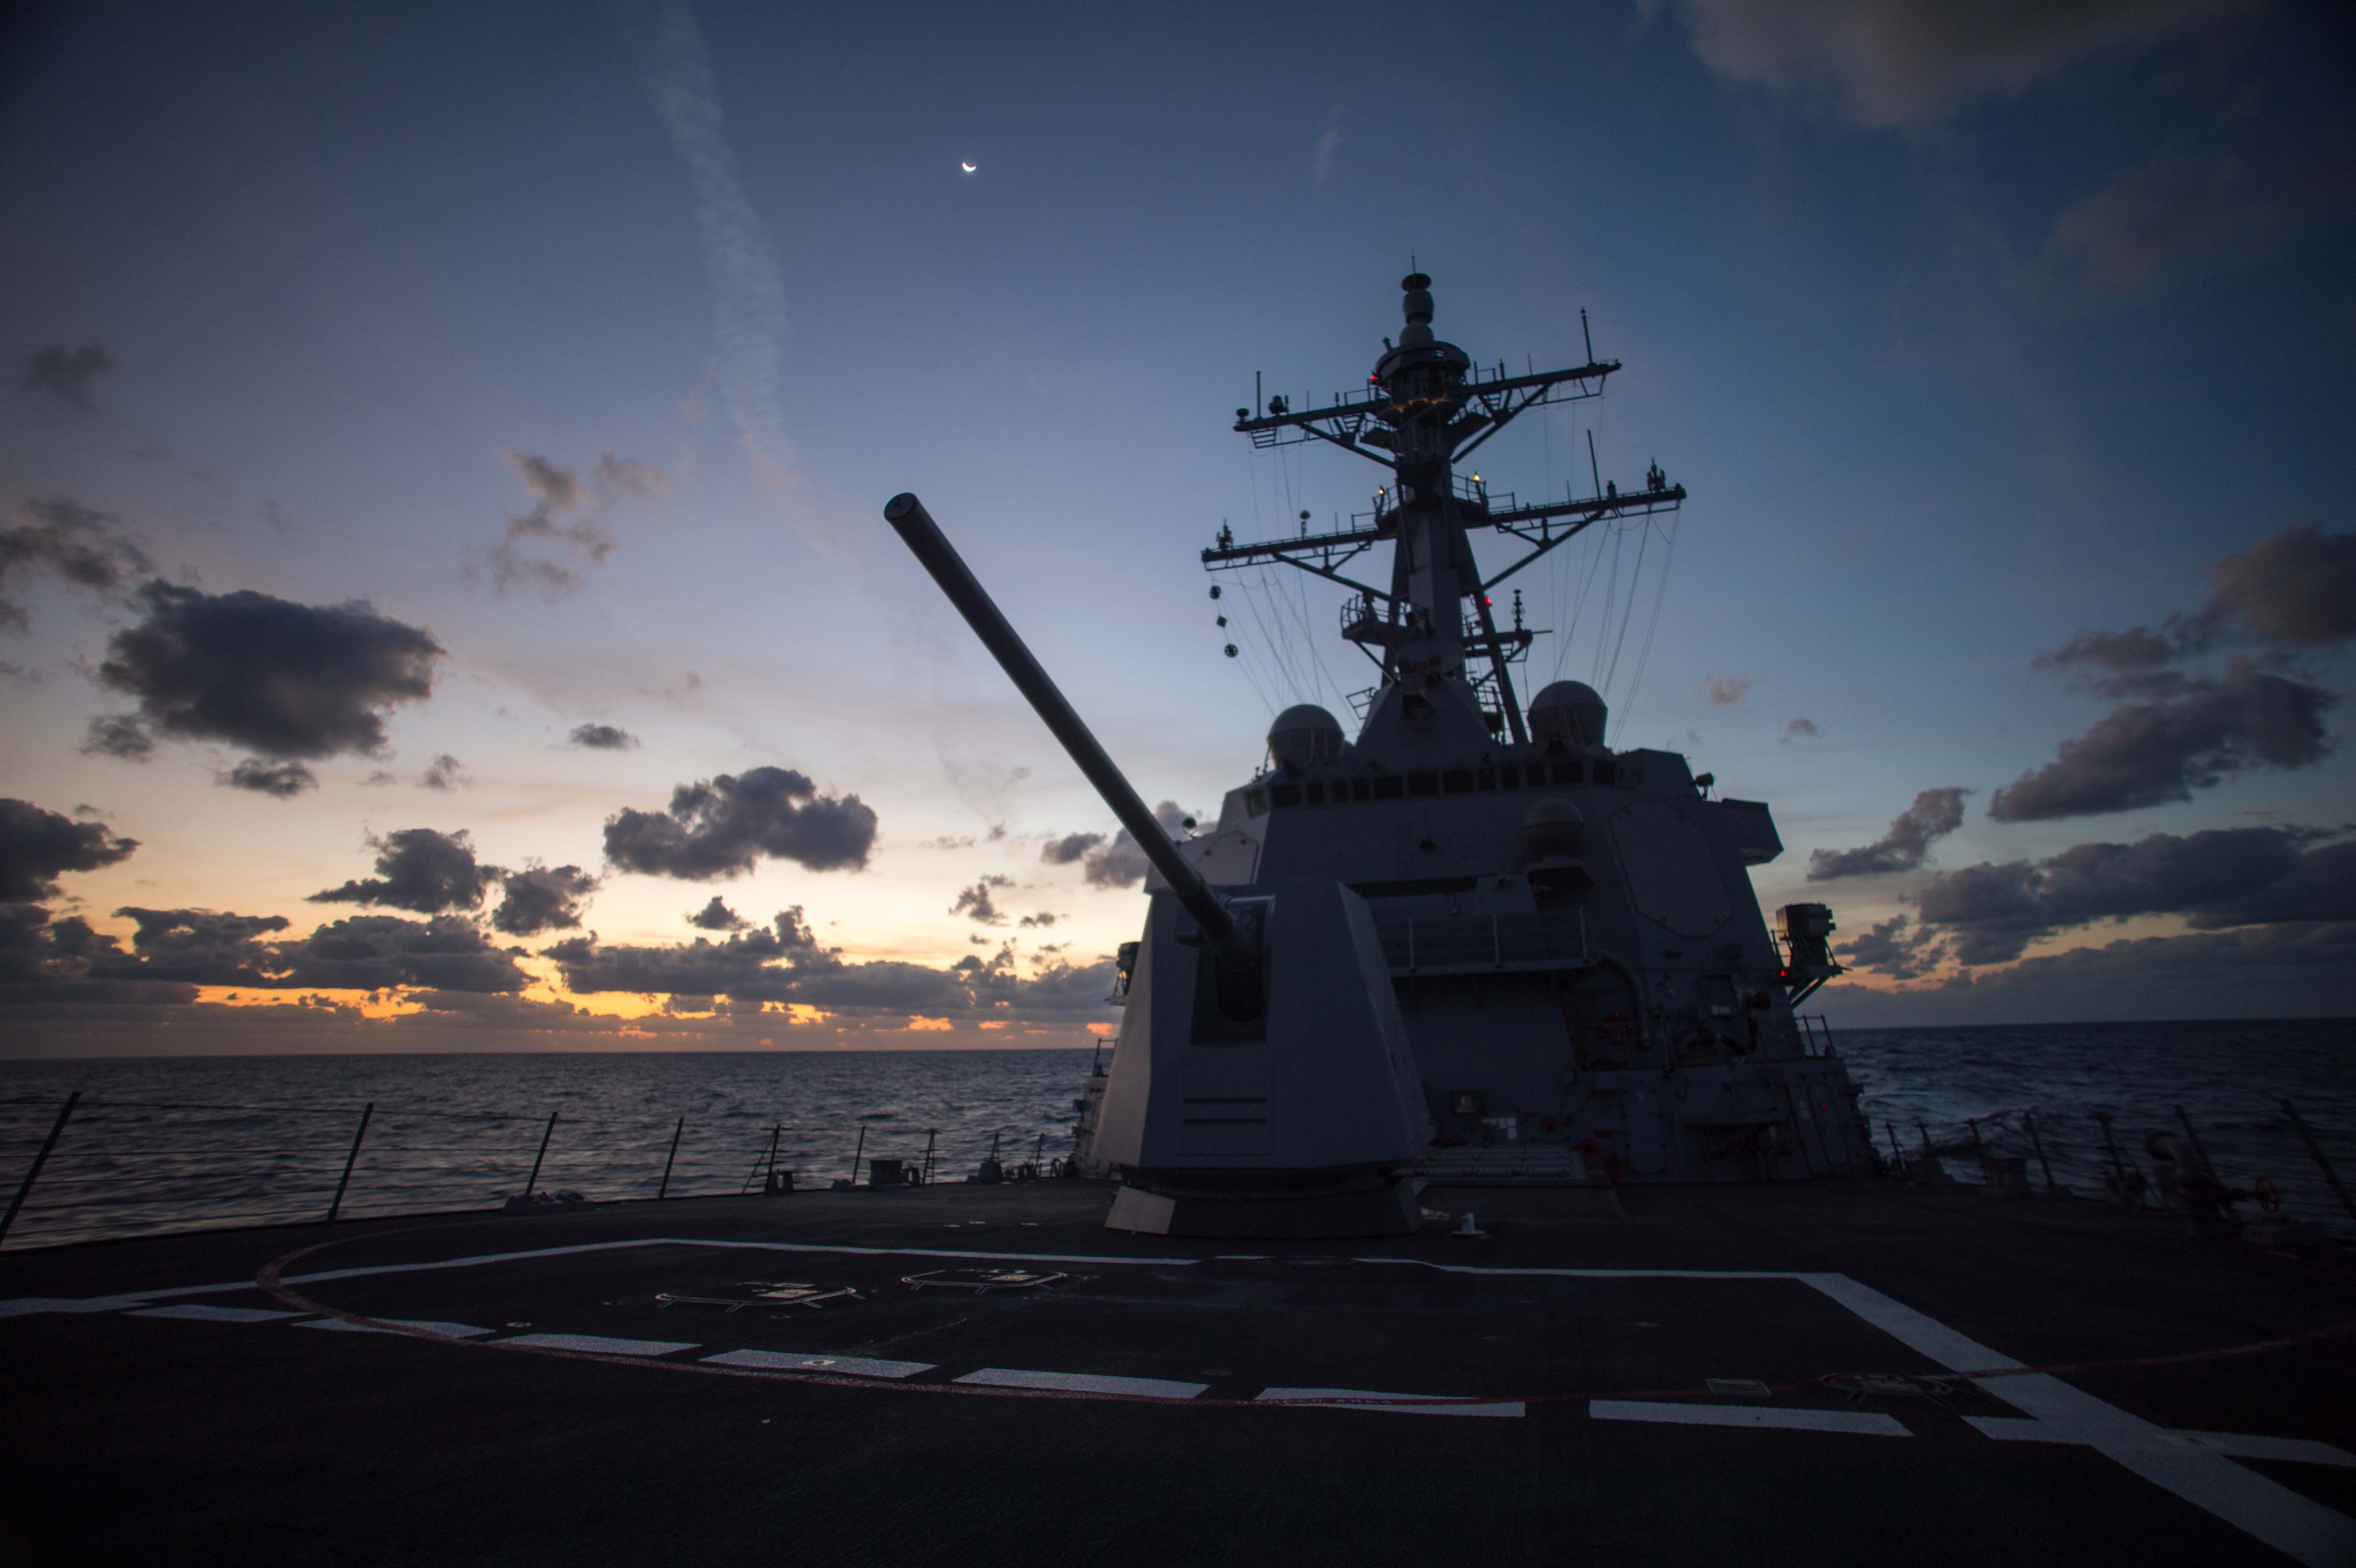 The guided missile destroyer John Finn (DDG 113) recently completed the last of three planned sea trials and is scheduled for delivery to the U.S. Navy in December. Huntington Ingalls Industries photo.